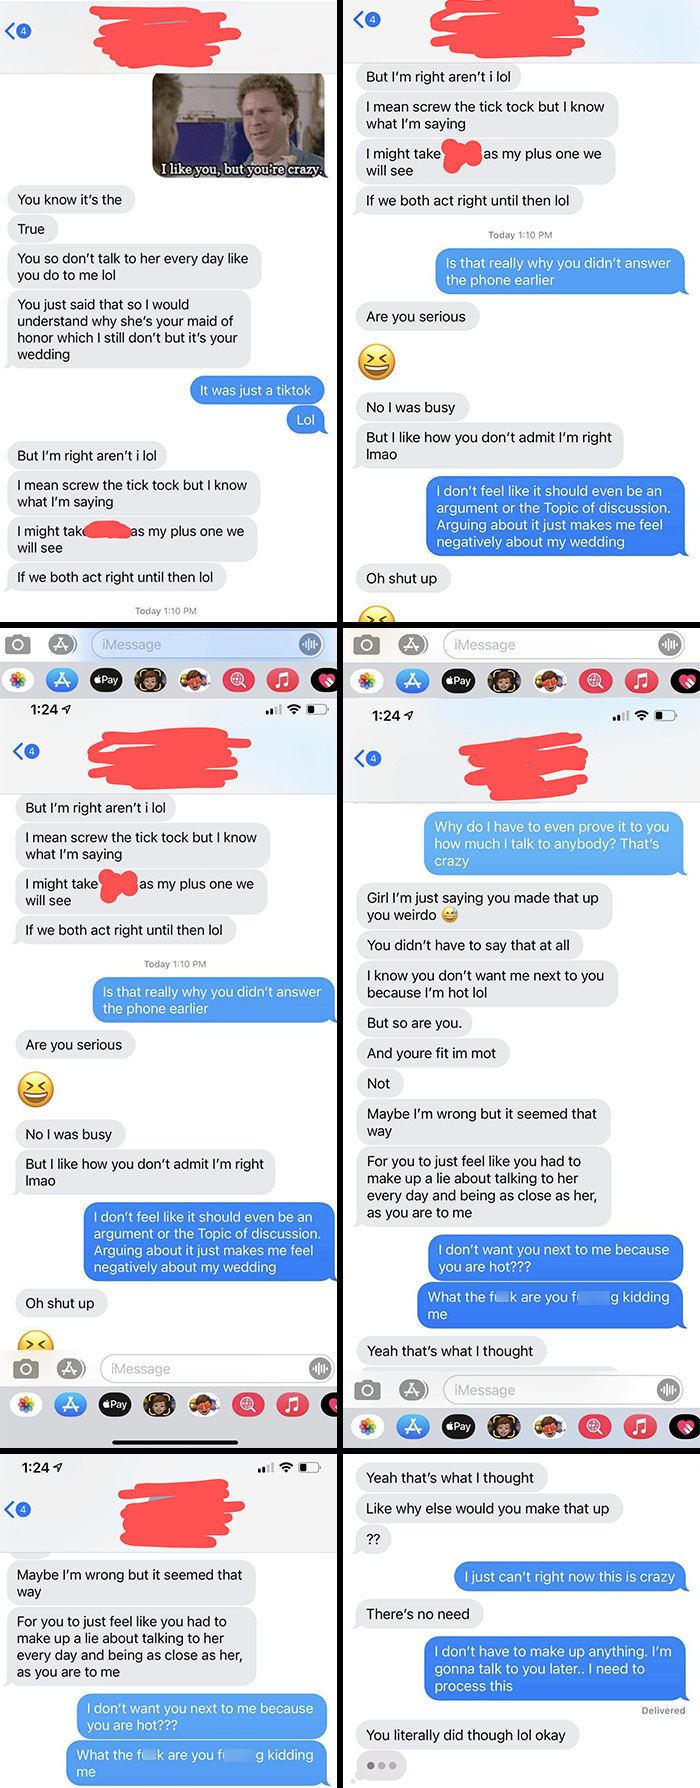 Bridesmaidzilla Can't Accept She's Not Moh, Insists Bride Is Lying About Her Relationship With Real Moh And Thinks It's Because She's "Hot".